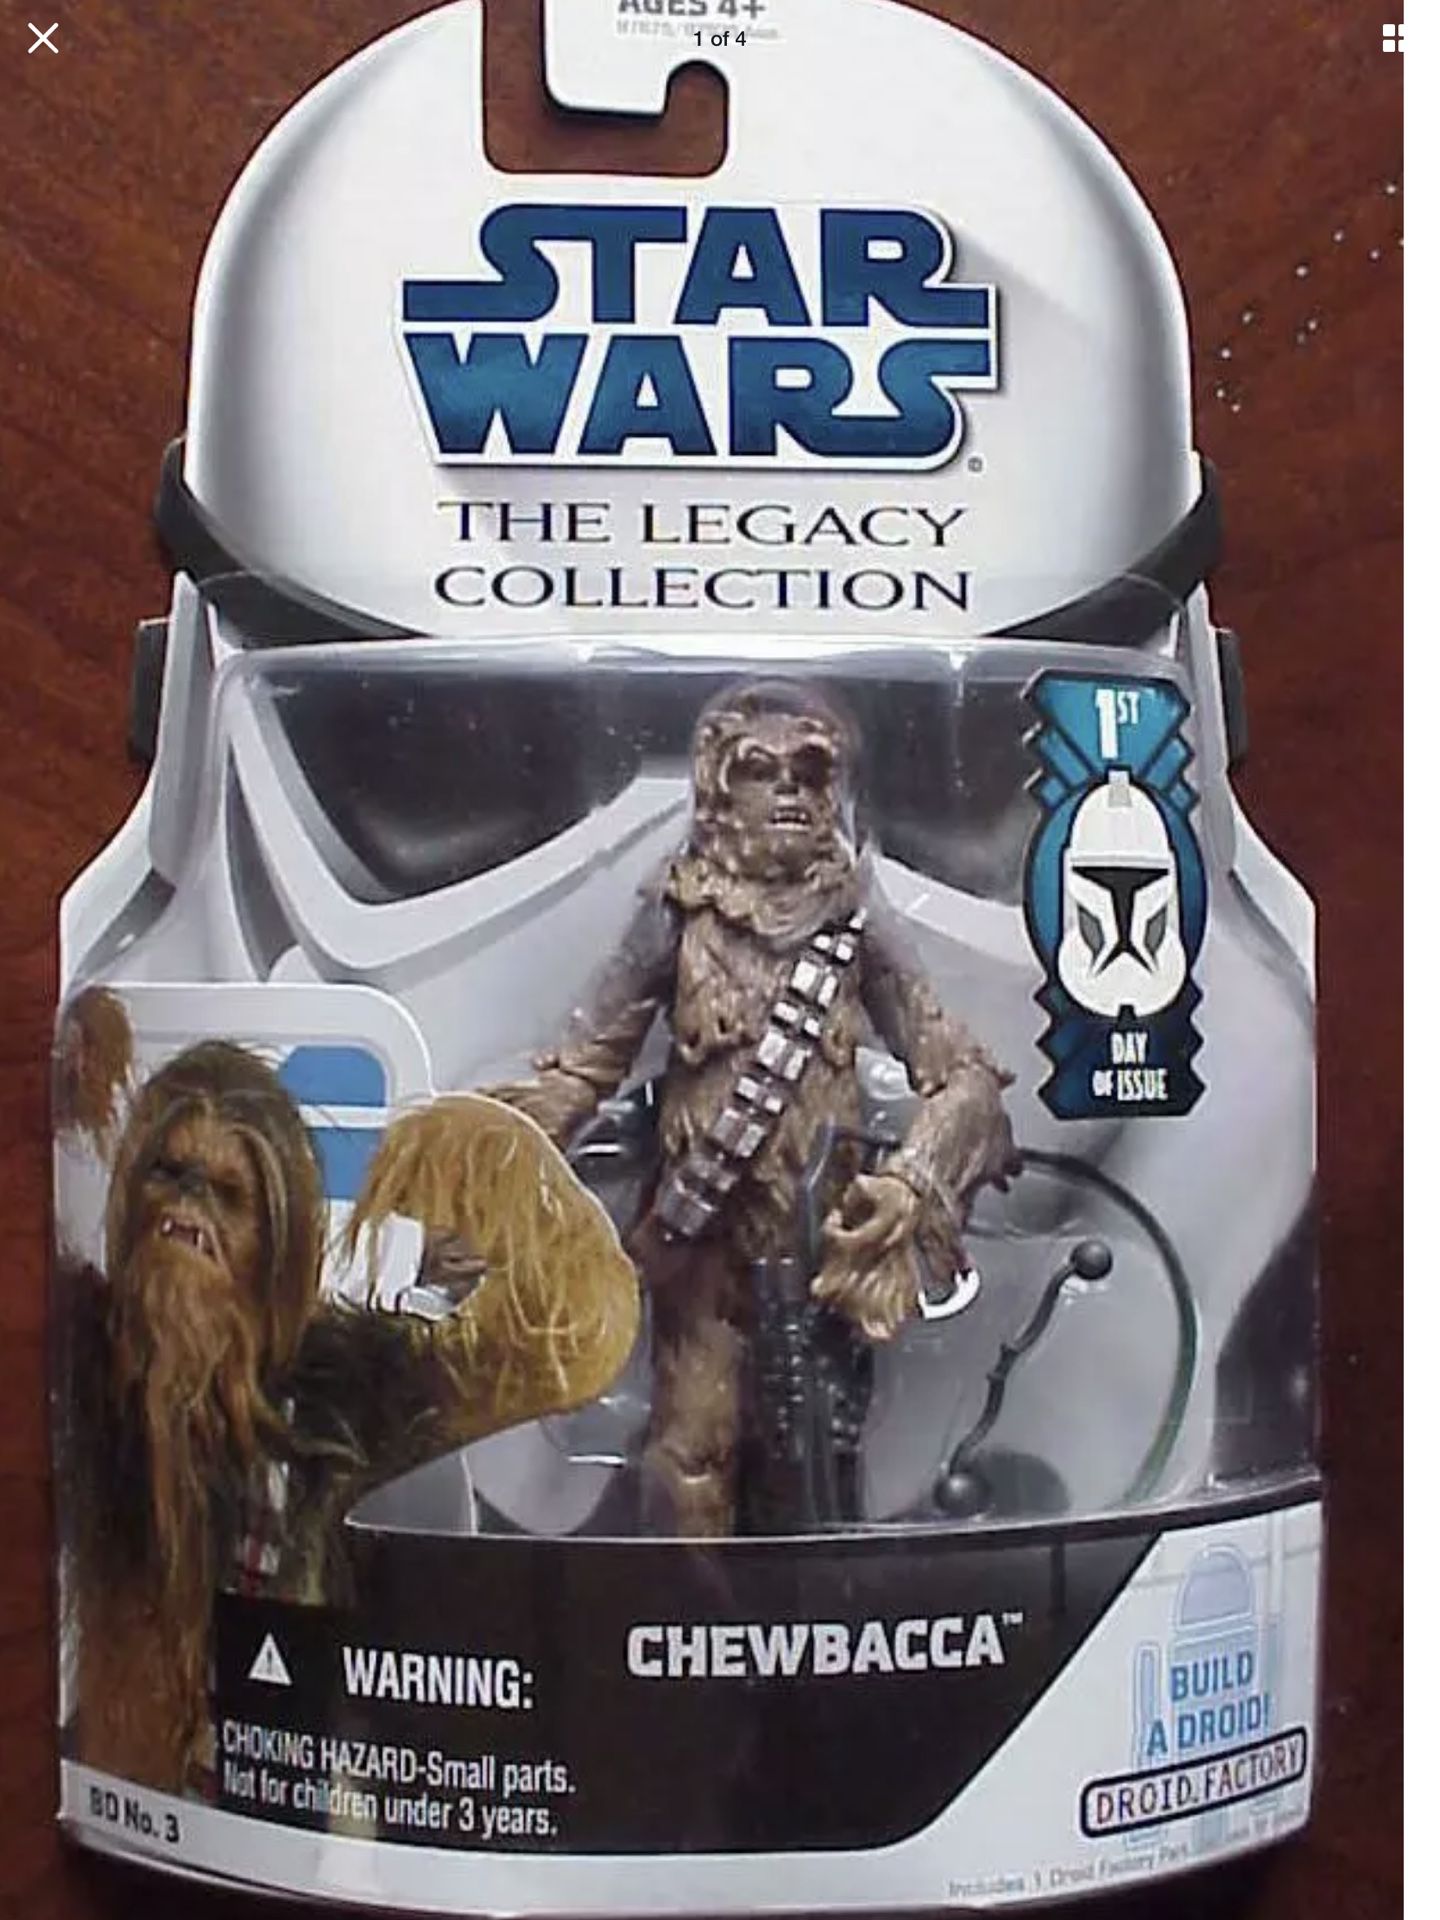 Star Wars - Chewbacca - 1st Day Issue - Hasbro - Disney - Legacy Collection - Mint Condition - Brand New - Exclusive Toys